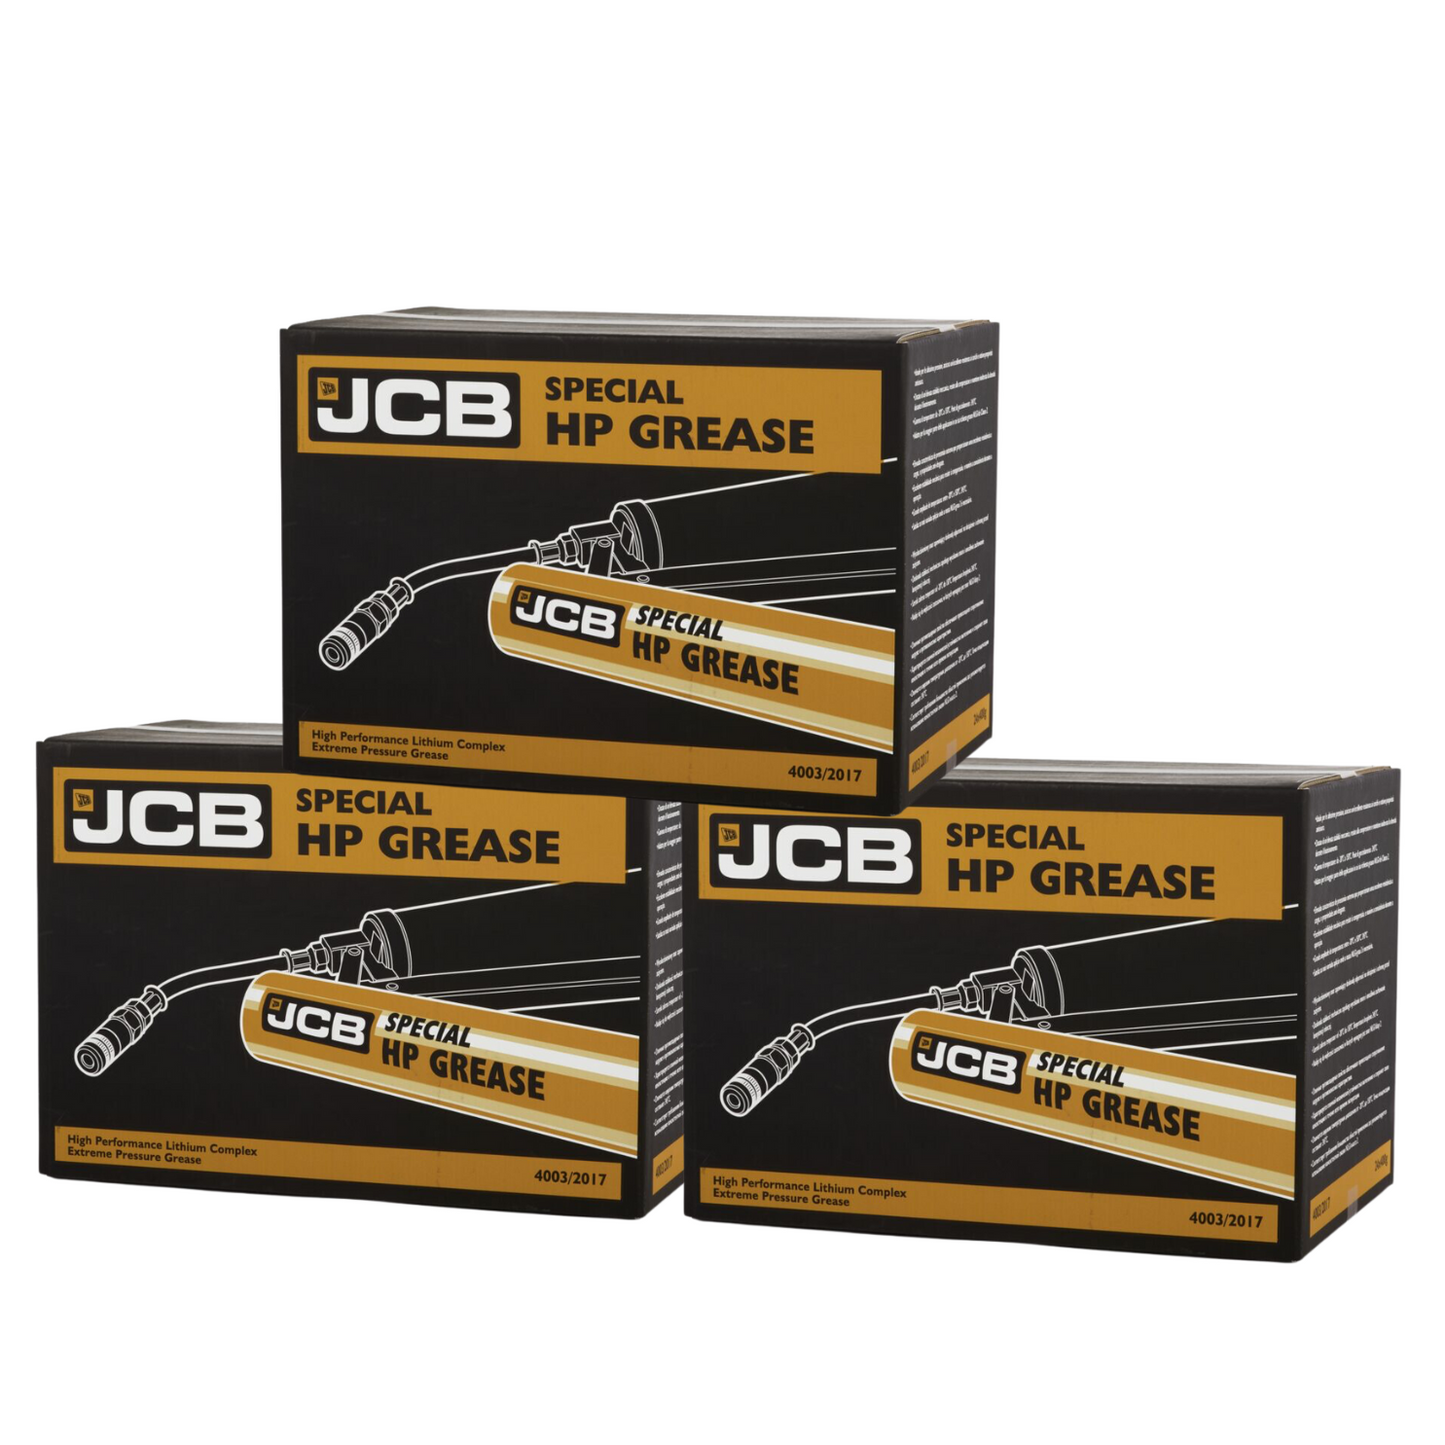 JCB Special High Performance Grease (72 Tubes): 4003/2017